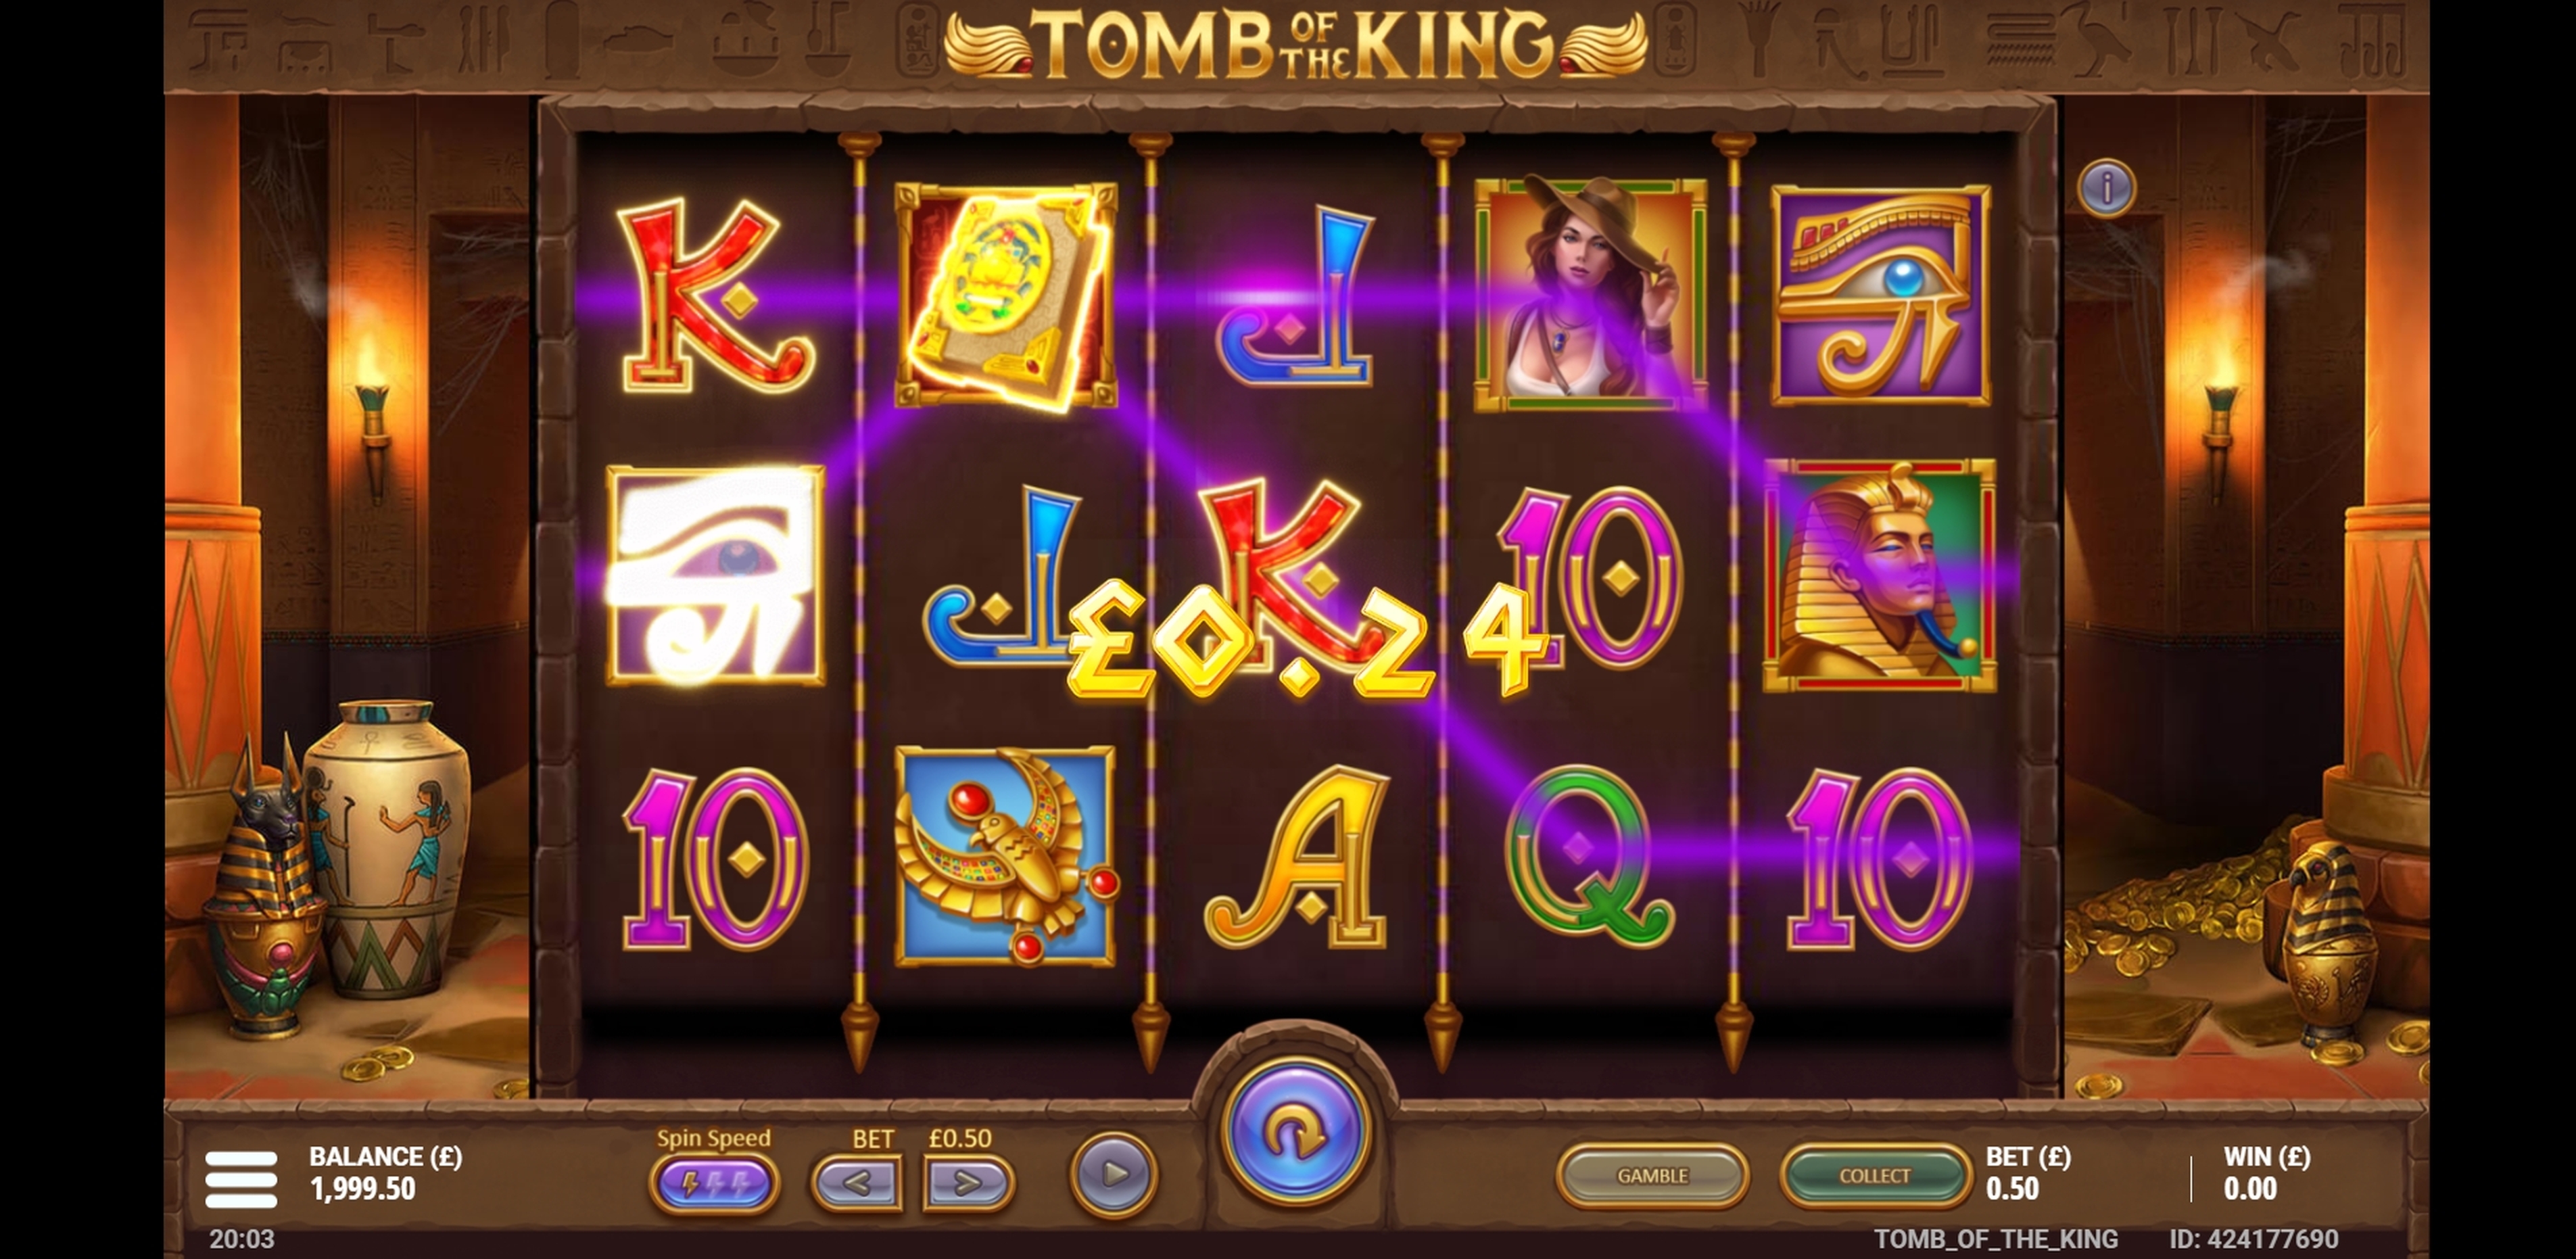 Win Money in Tomb of the King Free Slot Game by Gluck Games